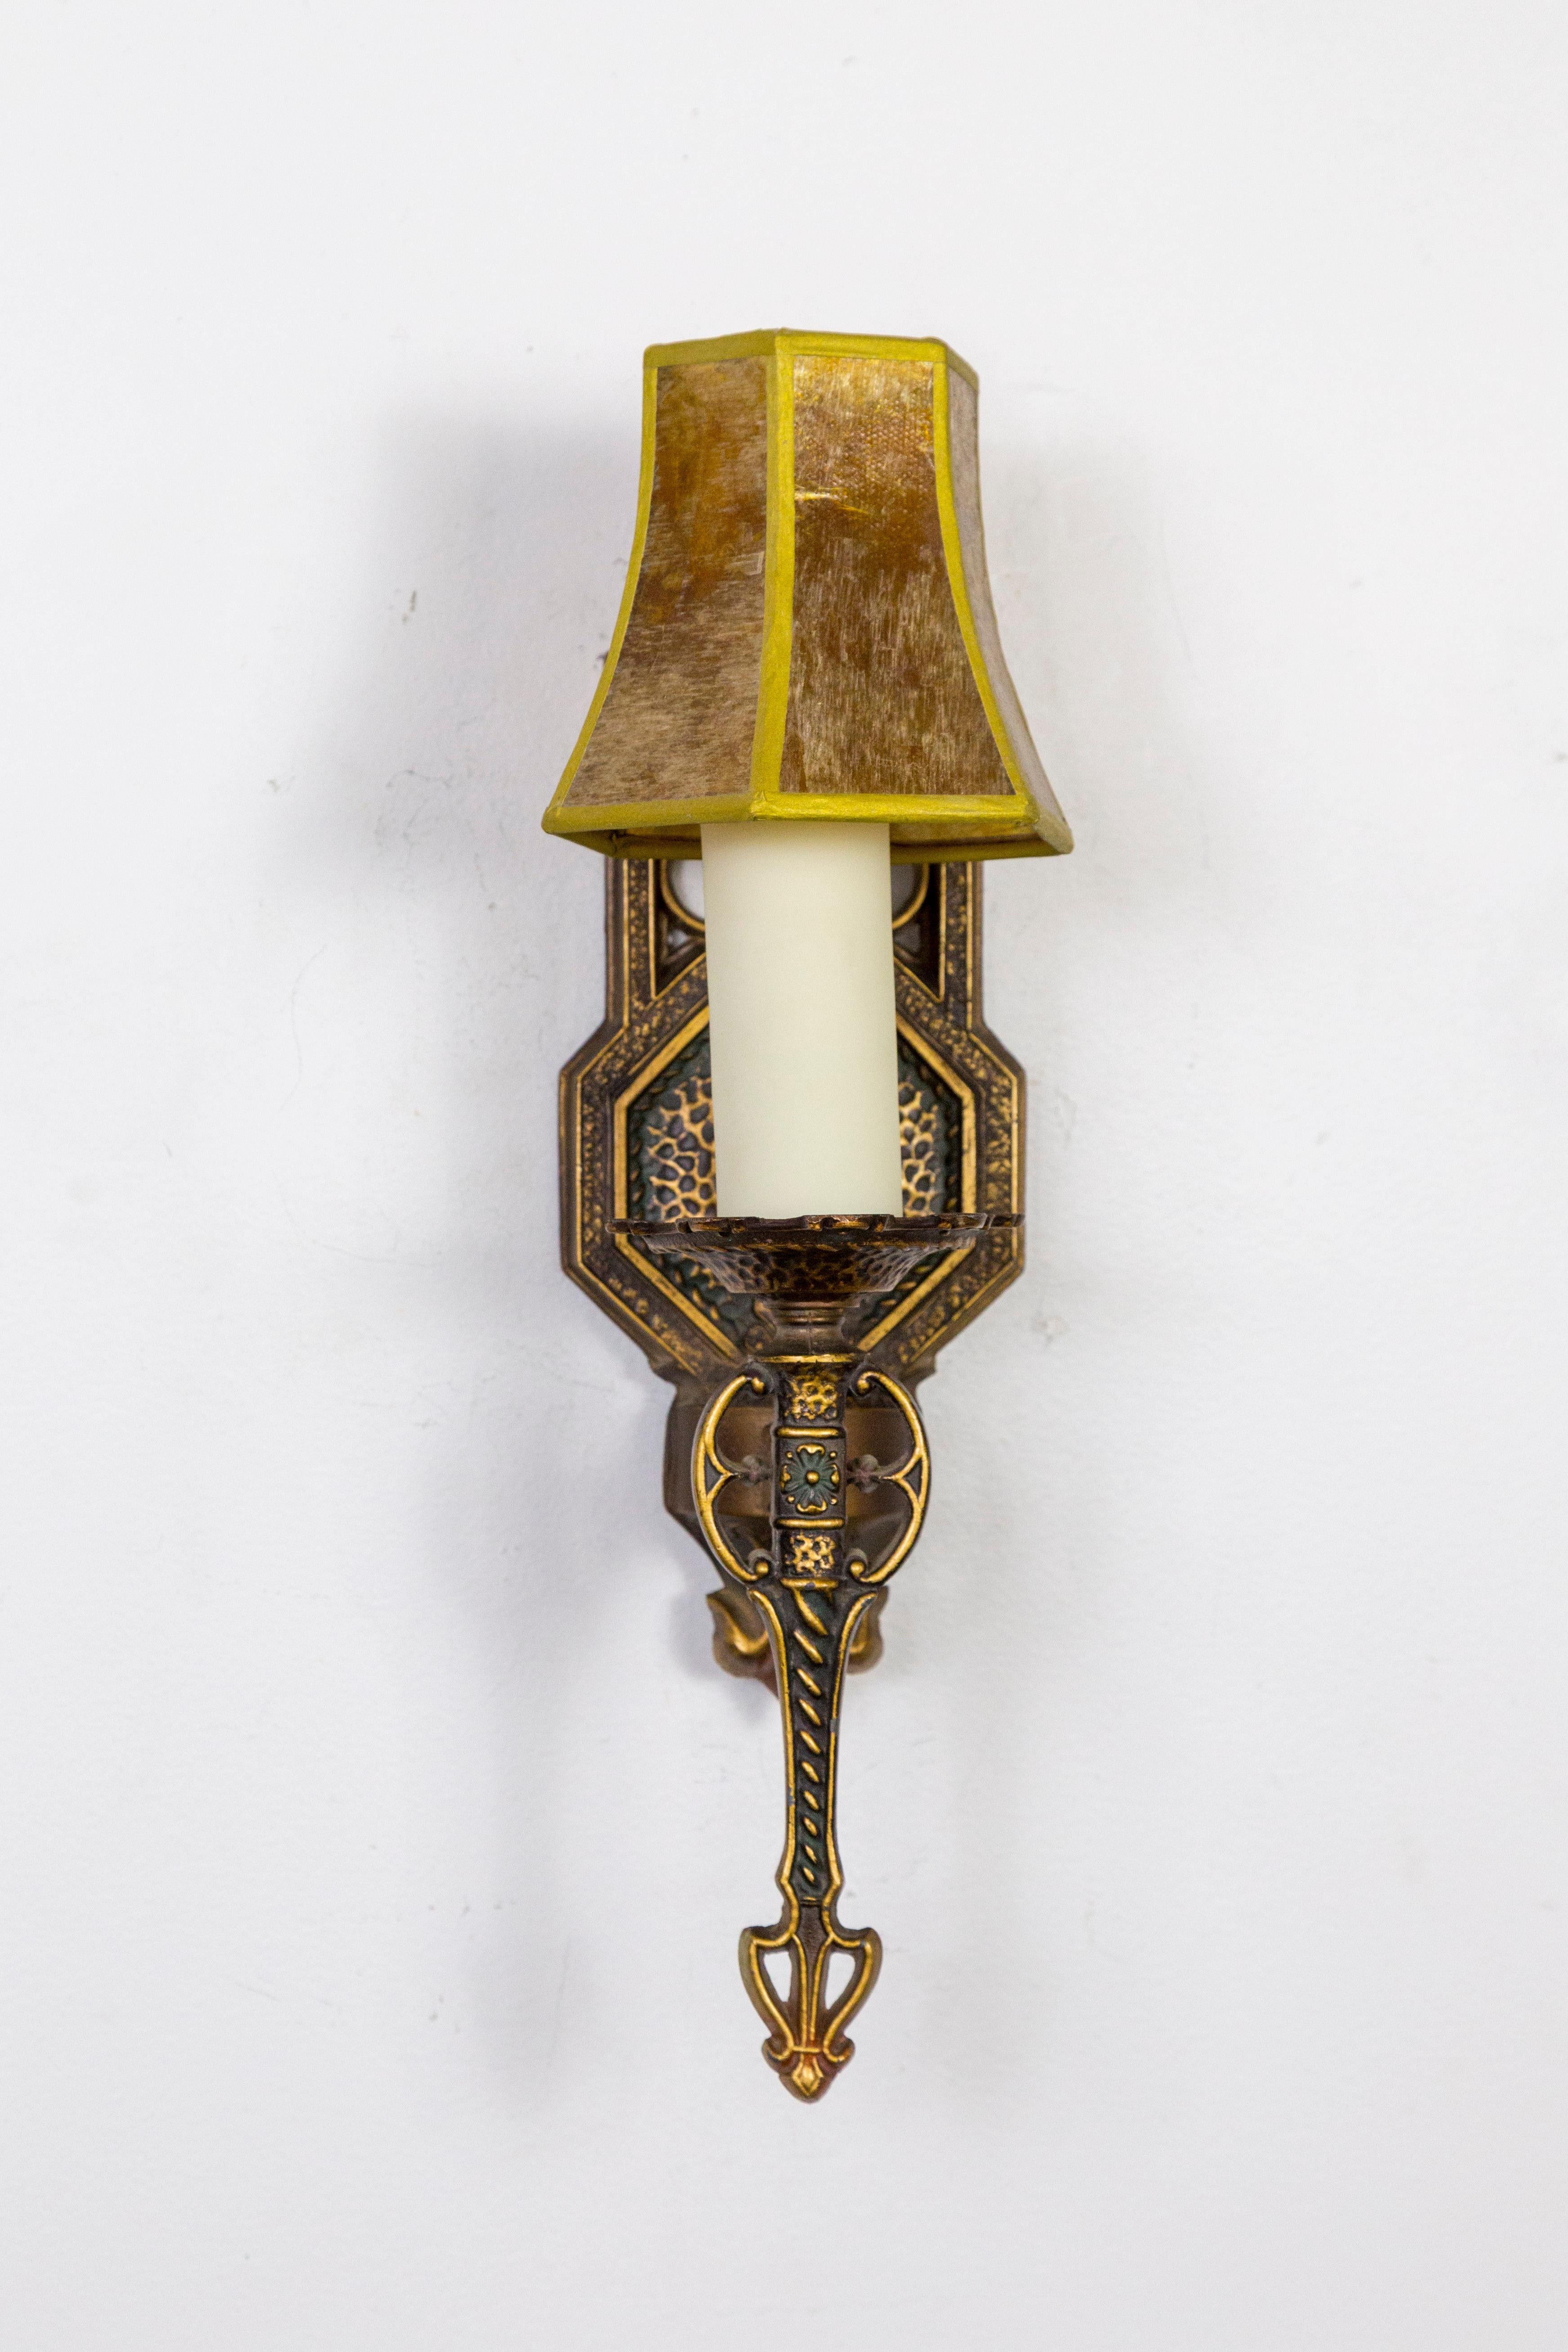 A pair of circa 1920s, metal candlestick sconces with a bronze-brass patina and Tudor styling. Warm, golden light comes through the mica lamp shades that also look great unlit. Newly rewired with new poly-wax candle covers. 6.25 depth x 14.5 height